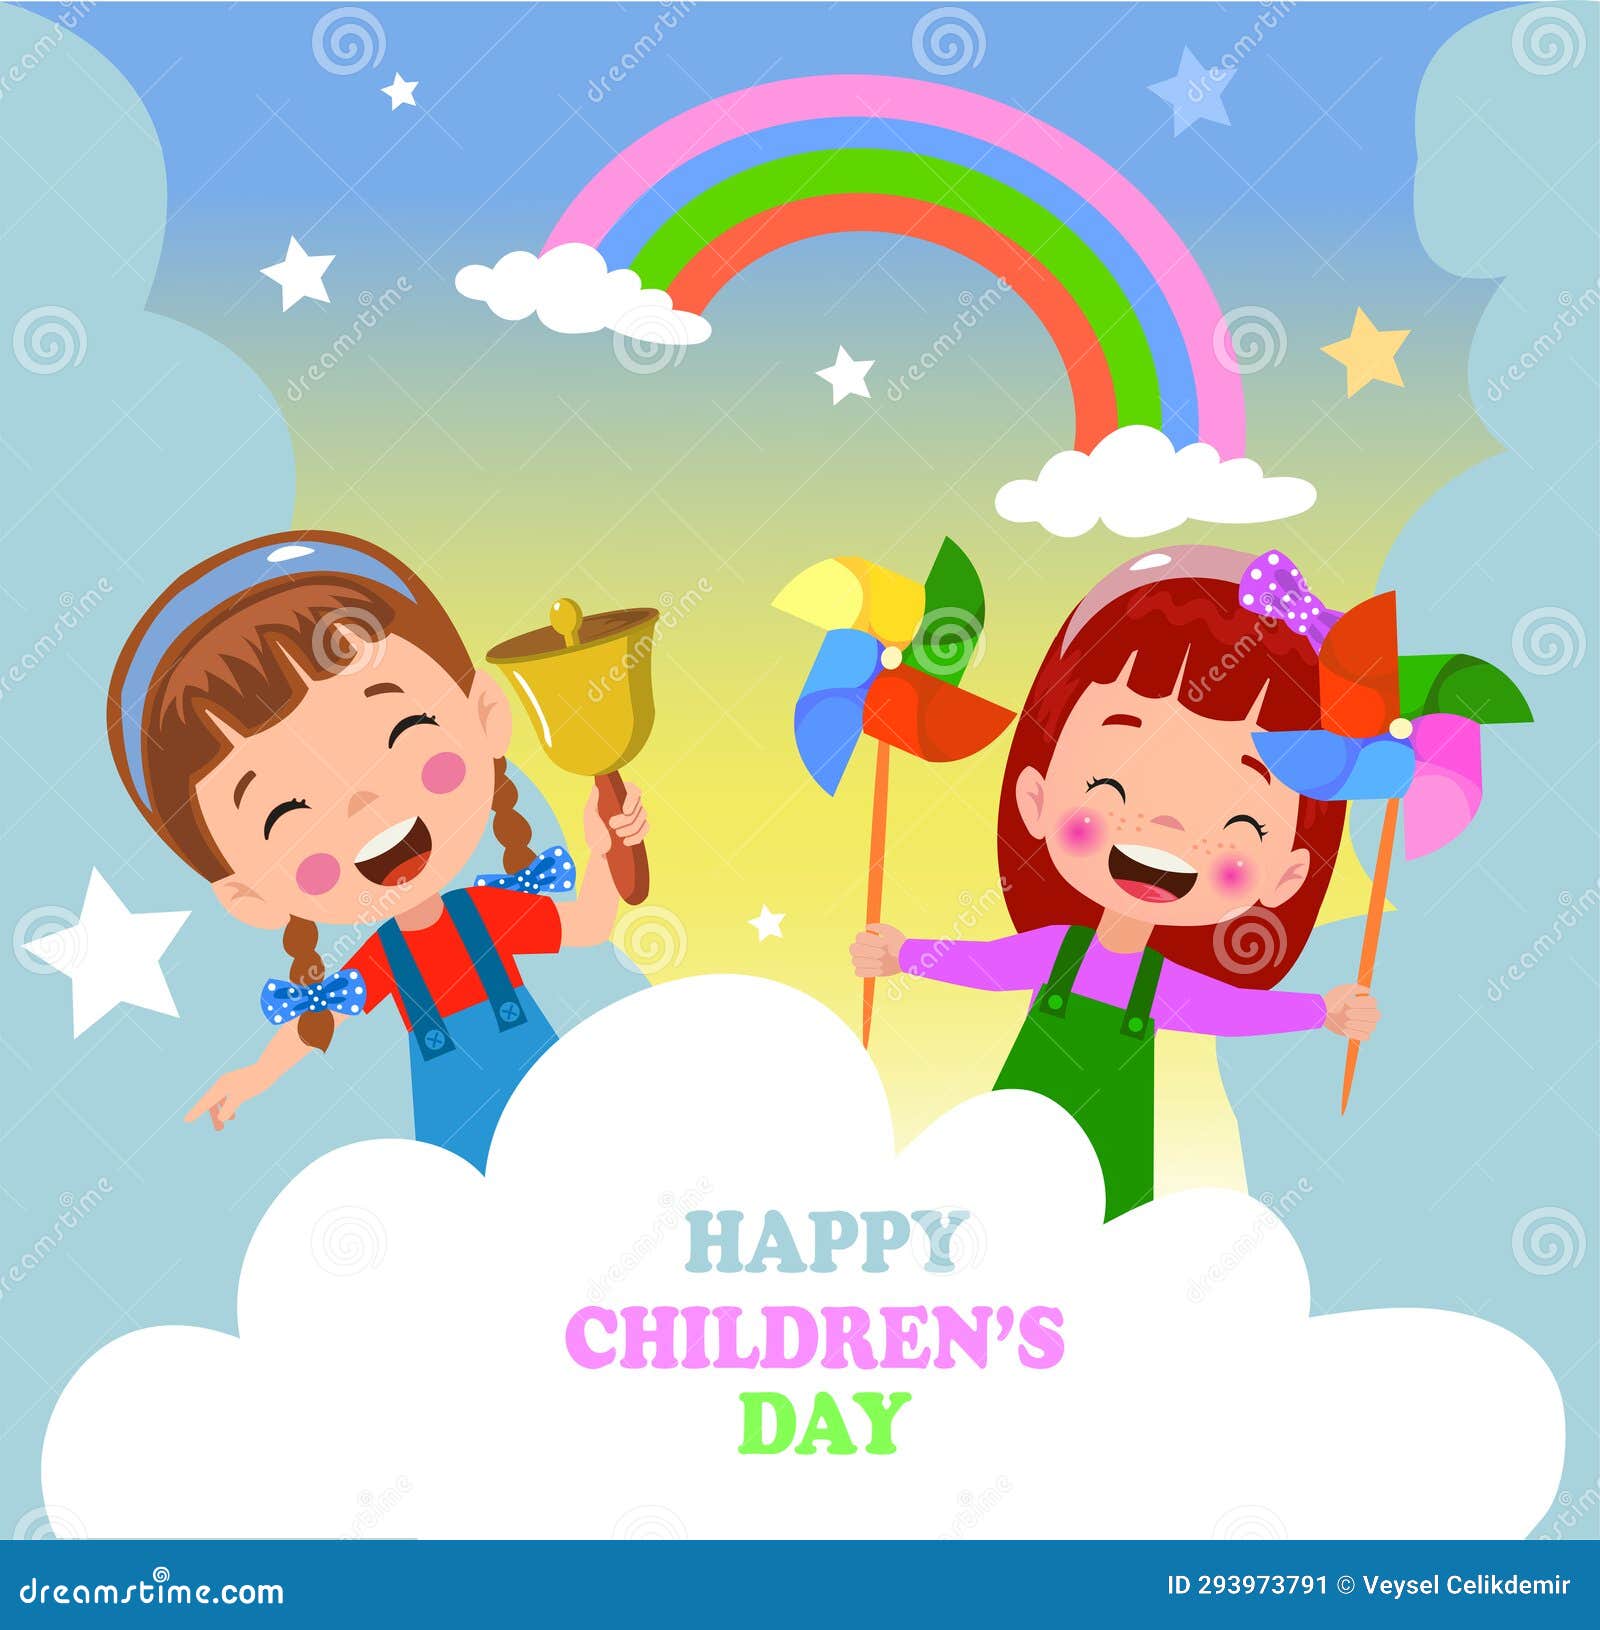 a poster for the children's day with the words happy children's day